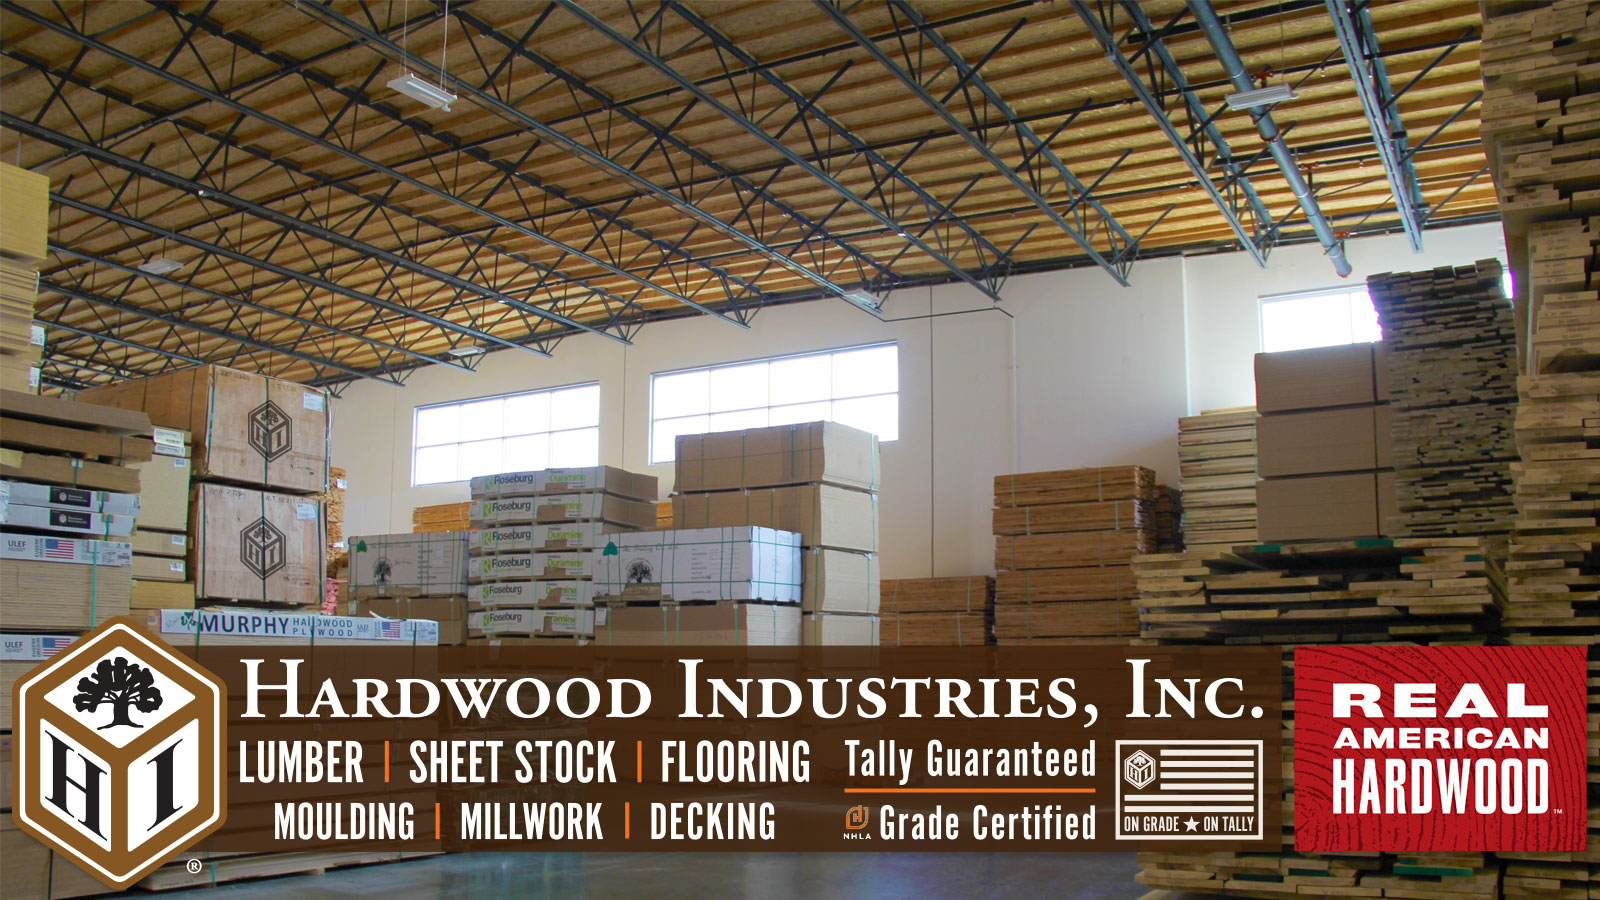 Hardwood Industries Tally Count Guaranteed and NHLA Grade Certified.